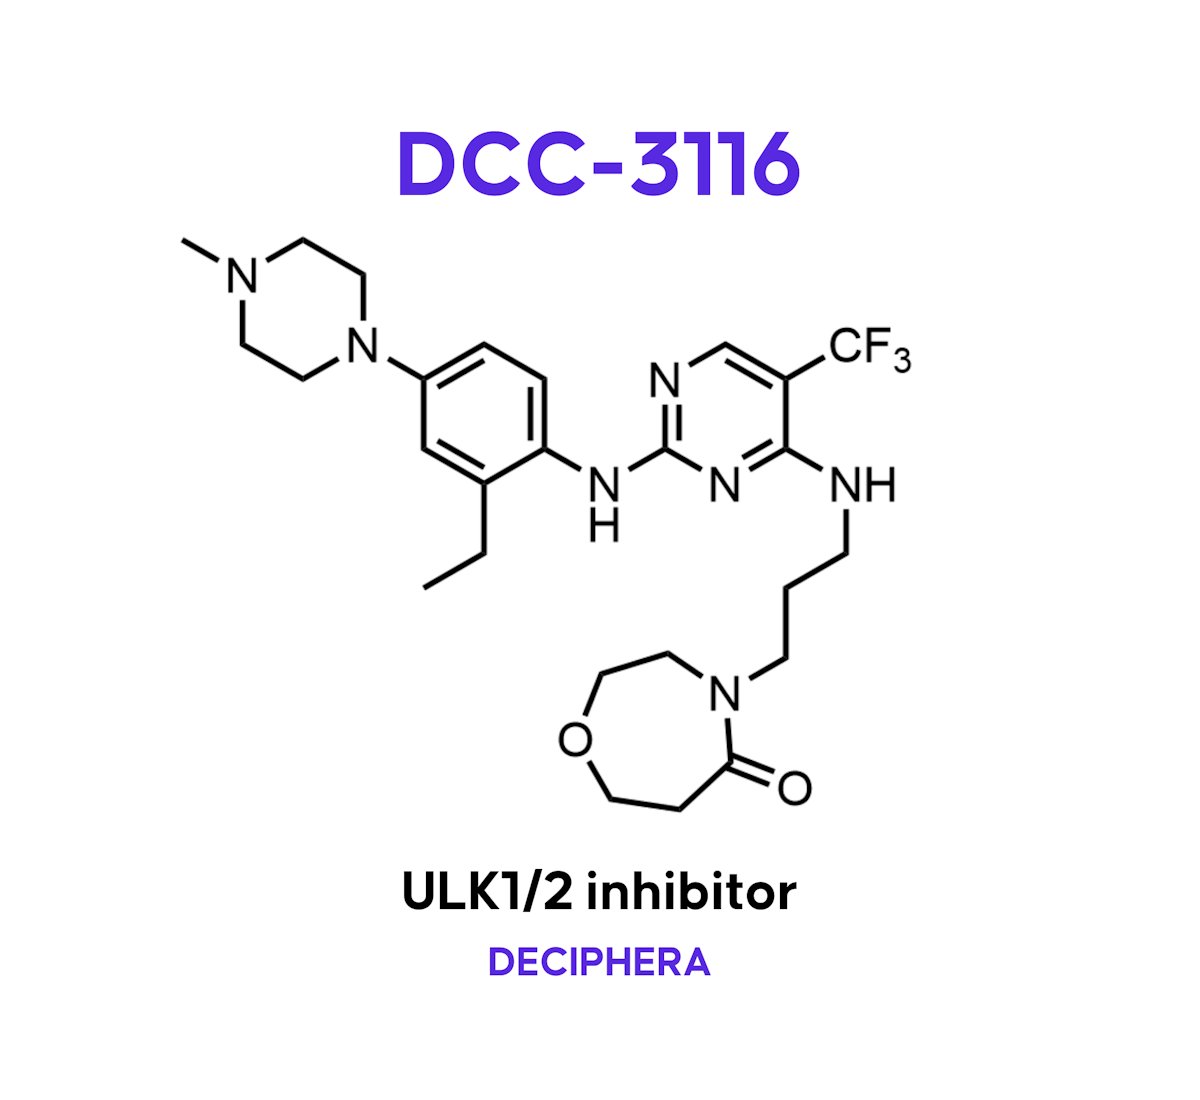 DCC-3116: Deciphera Unveils a First-in-Class Oral ULK1/2 Autophagy Inhibitor with Broad Combination Potential | drughunters.com/3wb8NrY

Deciphera’s ULK1/2 inhibitor, targeting autophagy, was disclosed at the ACS Spring 2024 meeting and included preclinical combination data.